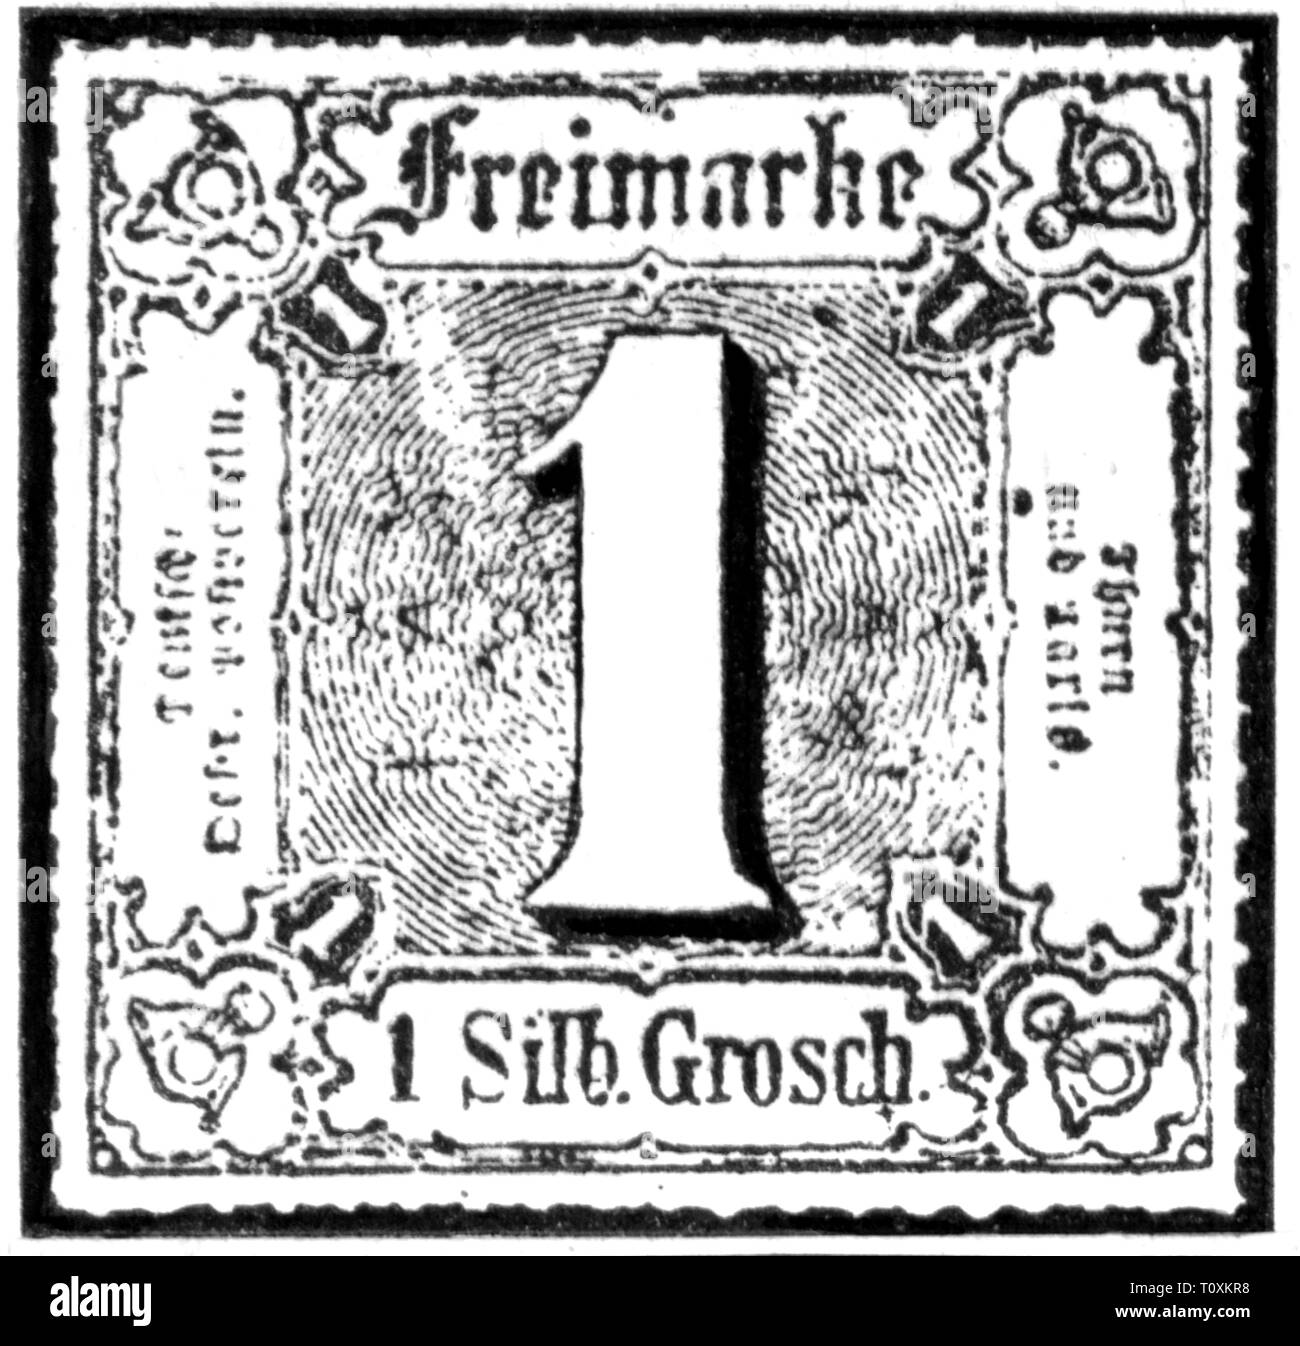 Mail, francobolli, Germania, Thurn-und-Taxis-Post, 1 argento groschen francobollo, Distretto Settentrionale, 1866 Additional-Rights-Clearance-Info-Not-Available Foto Stock